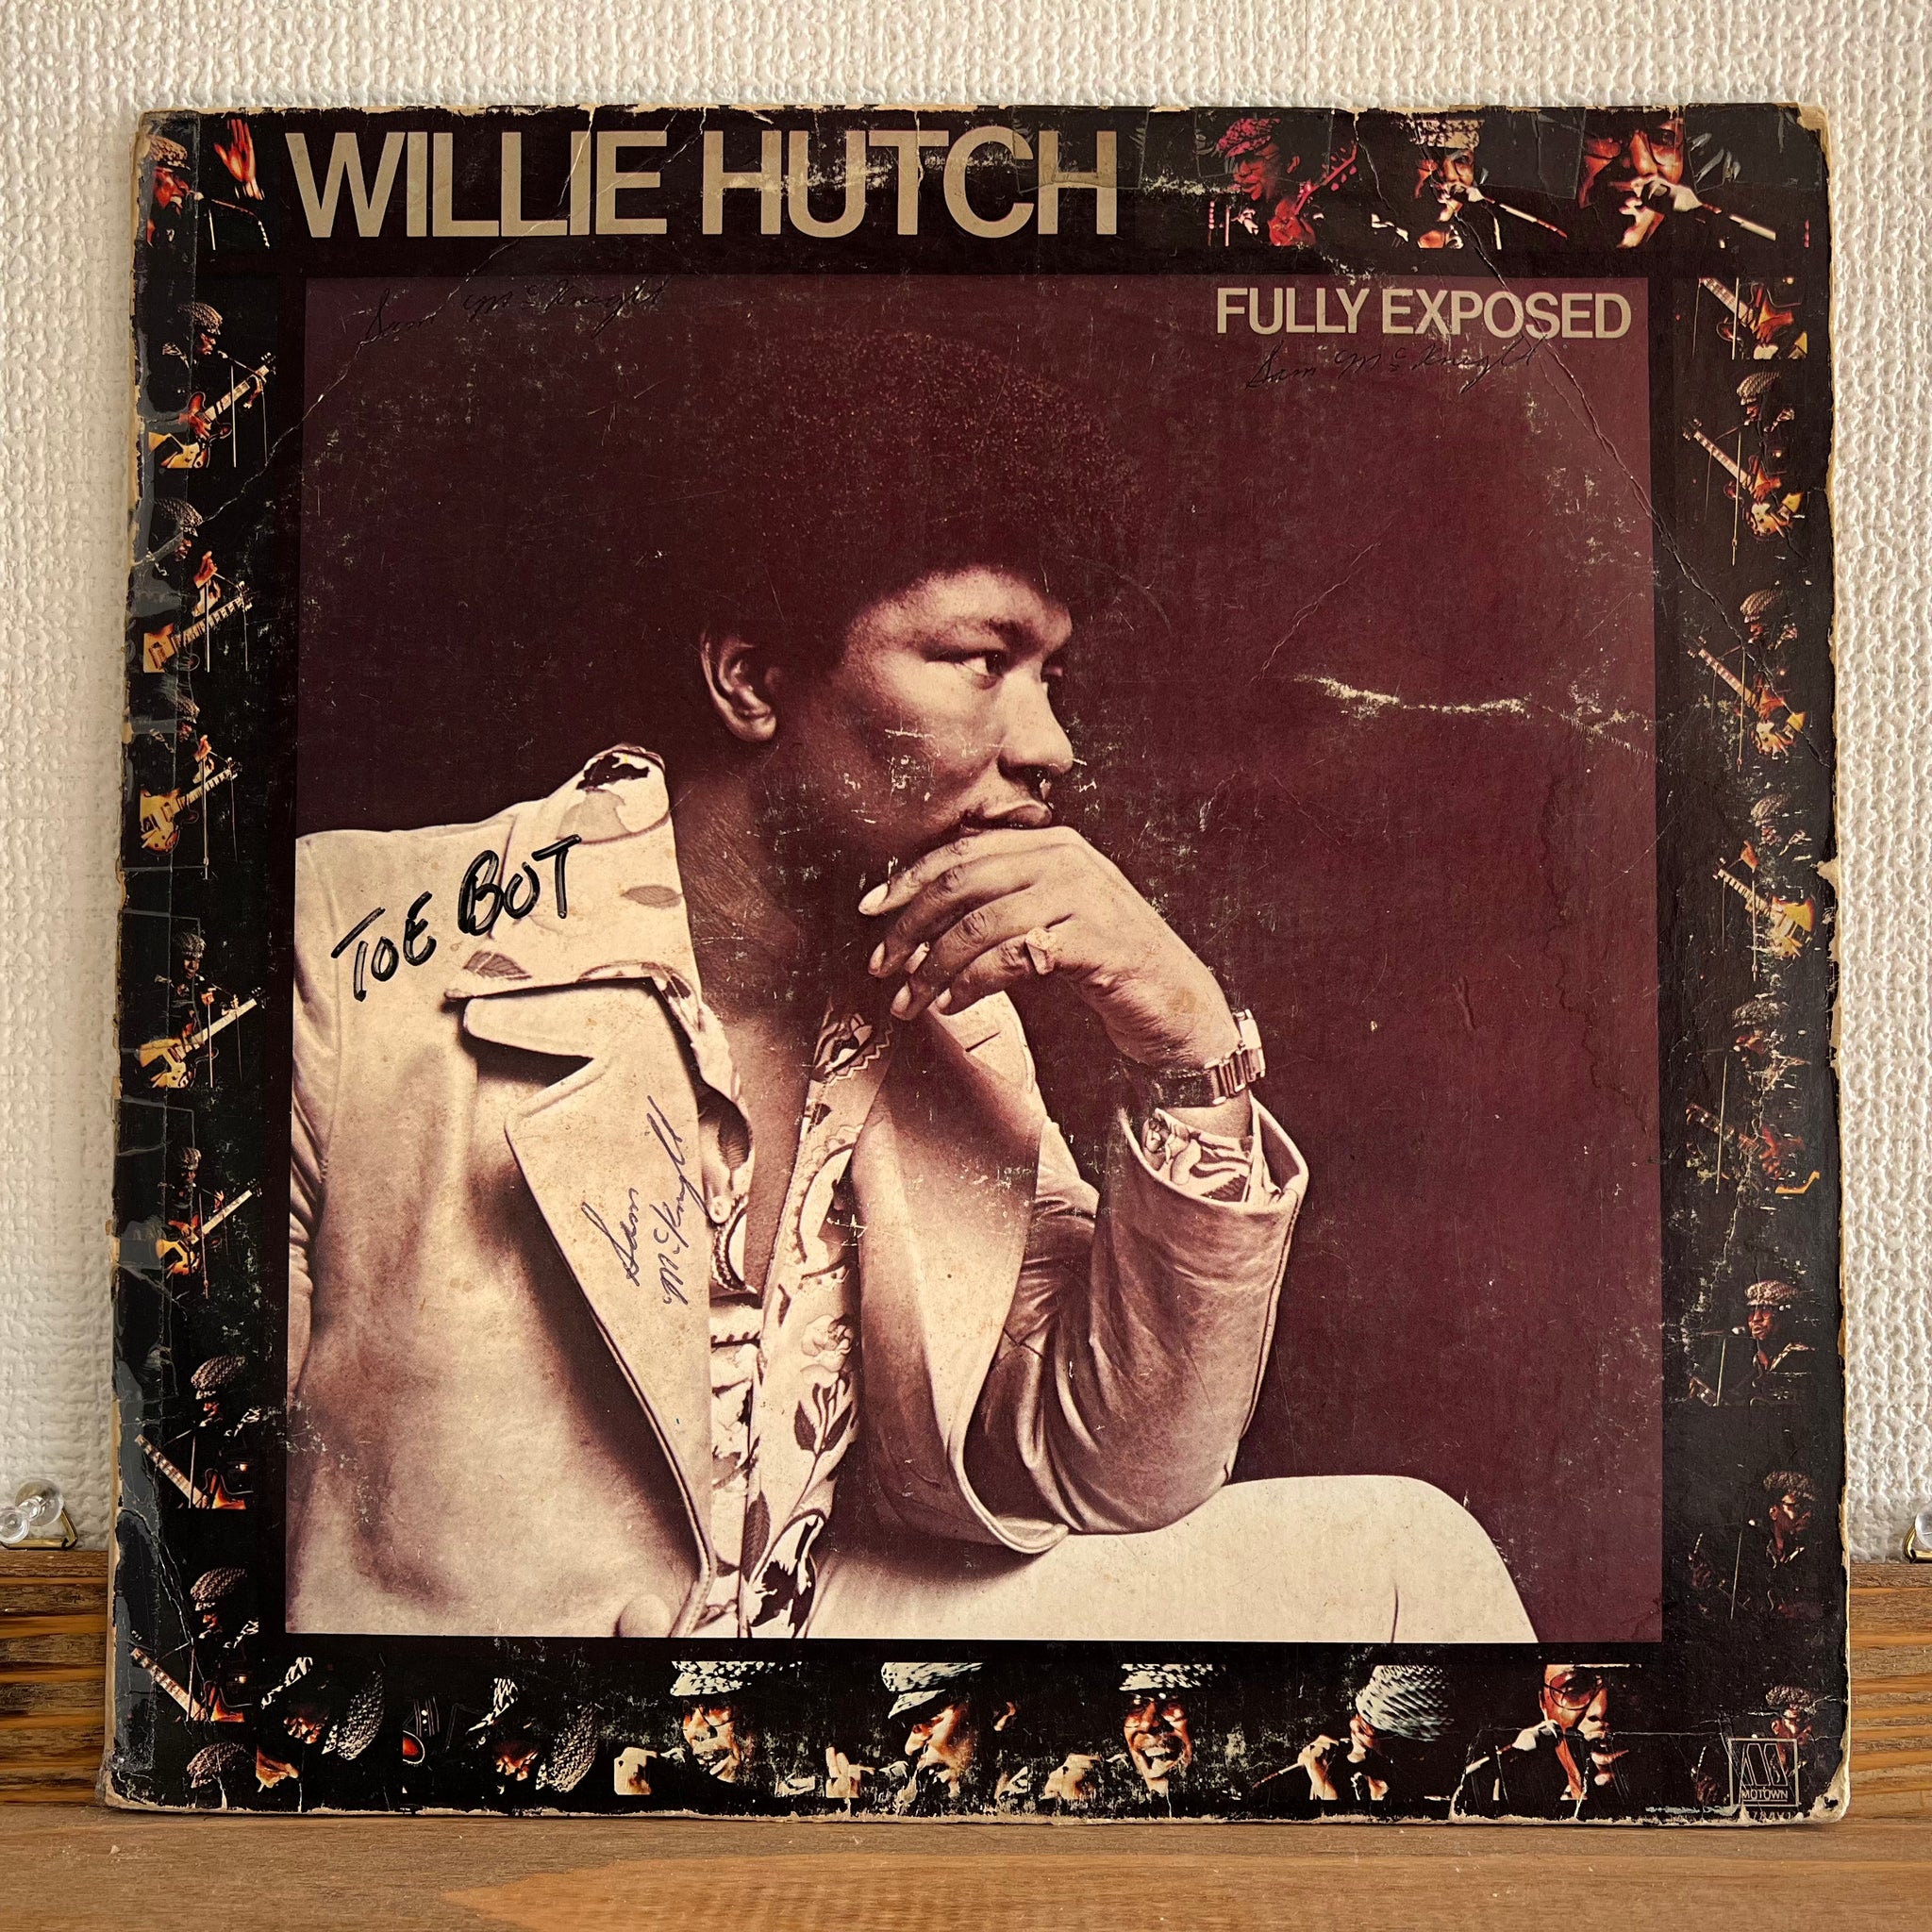 Willie Hutch - Fully Exposed